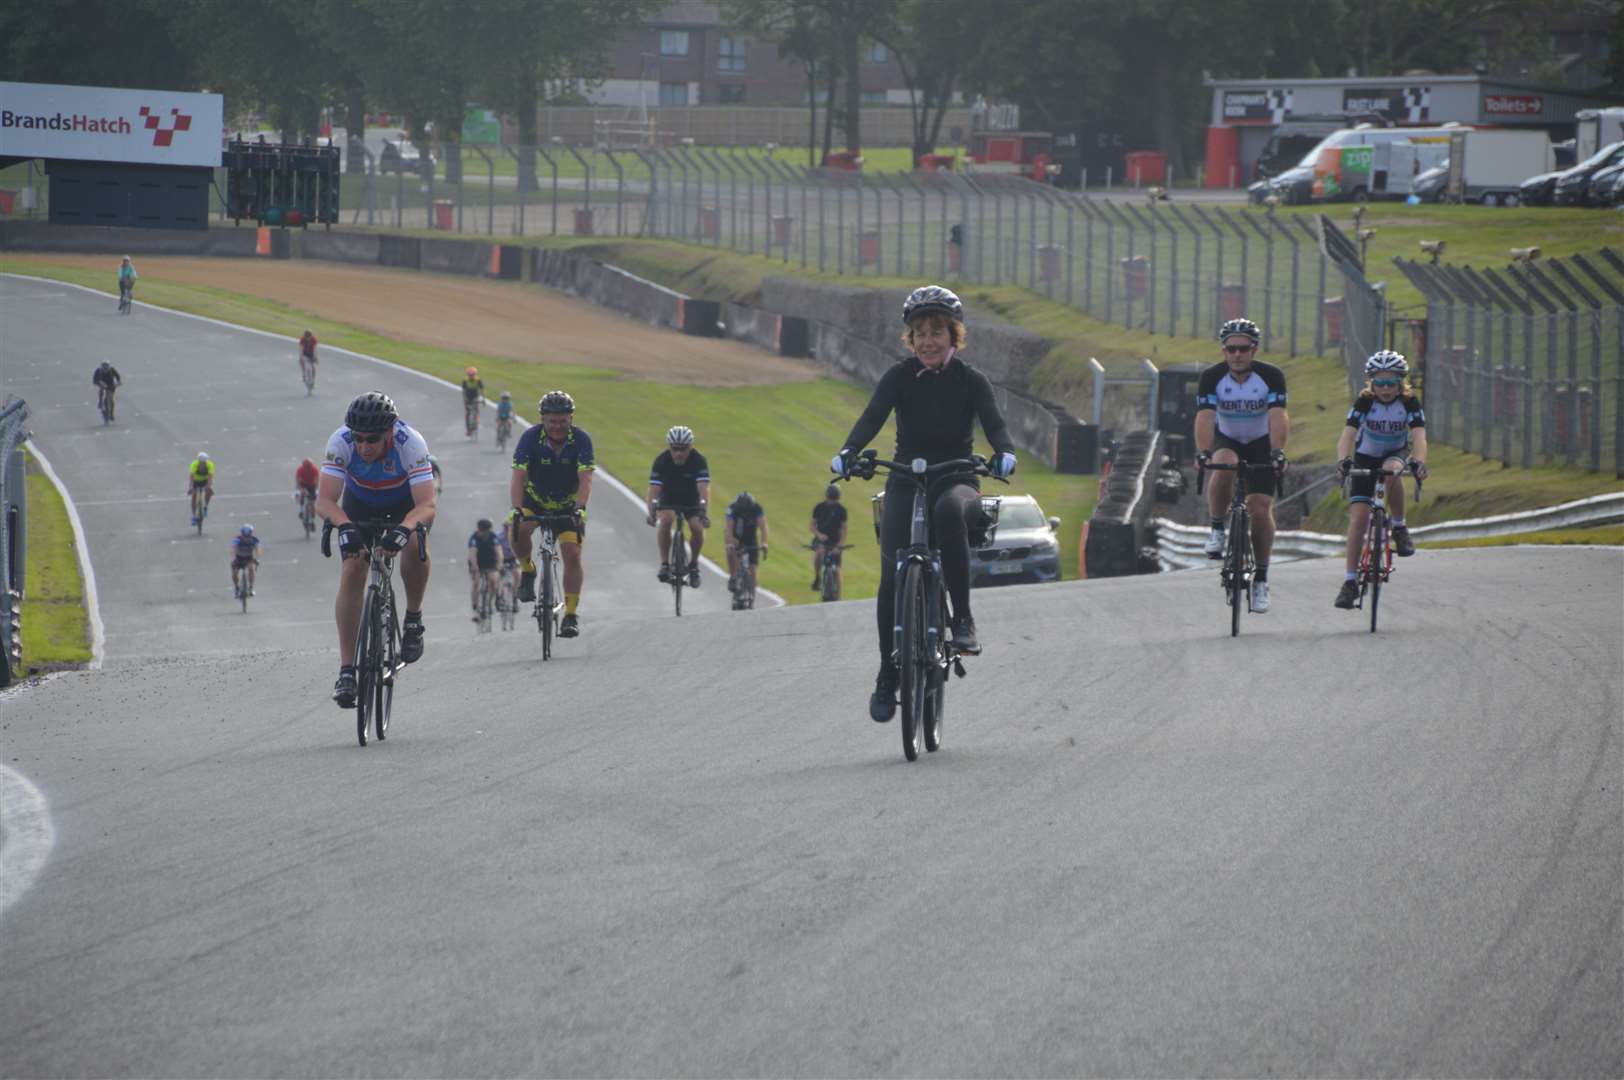 Cyclists take to the track. Picture: Colin McRobert